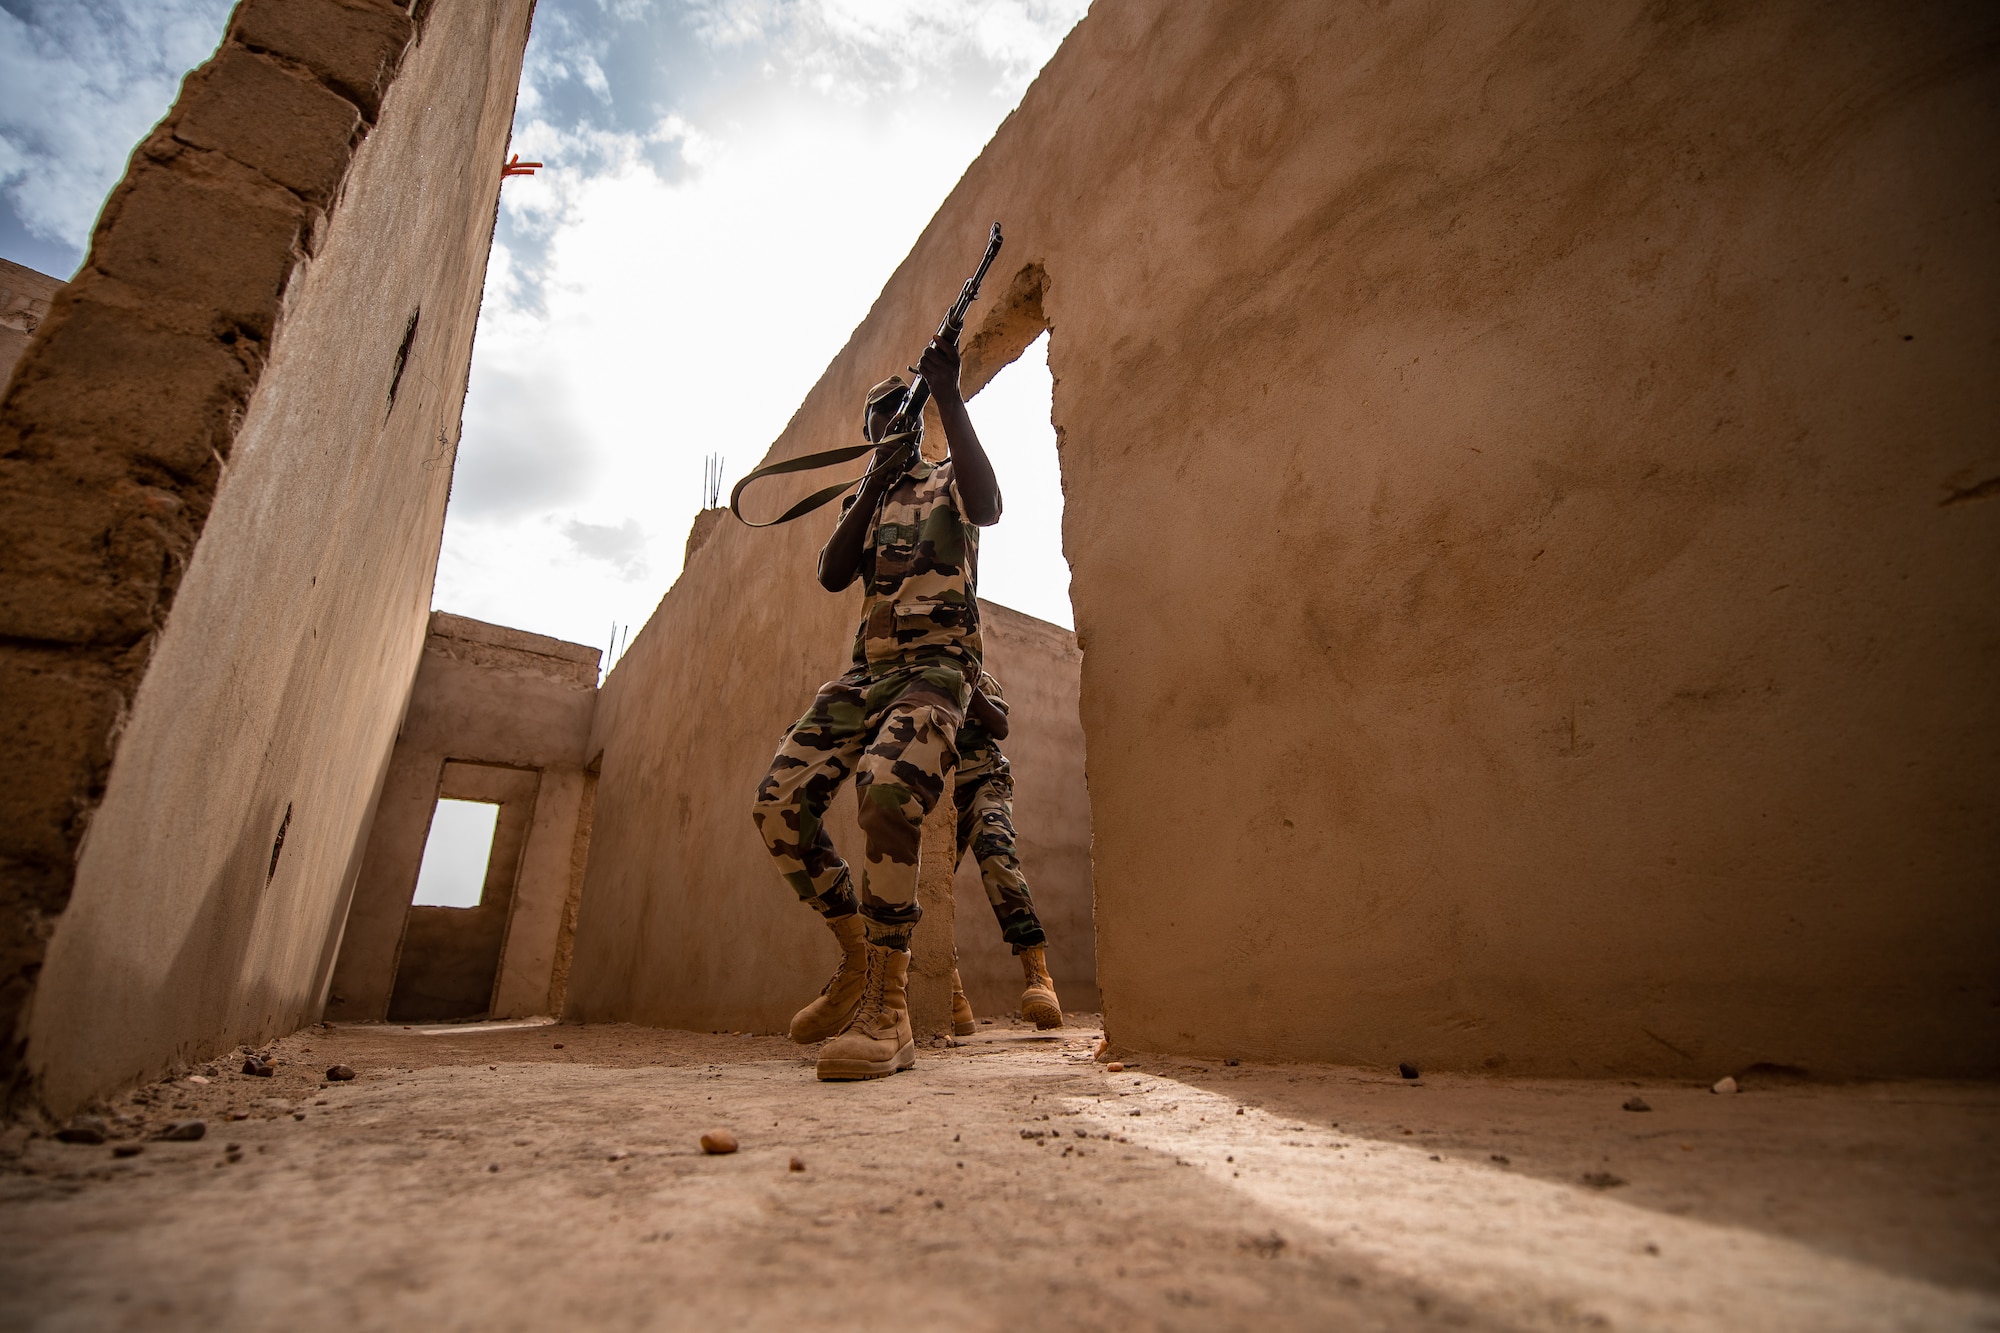 A Niger Armed Forces (French language: Forces Armées Nigeriennes) member clears a corridor during a training exercise with the 409th Expeditionary Security Forces Squadron air advisors at the FAN compound on Nigerien Air Base 201 in Agadez, Niger, July 10, 2019. The air advisors taught them how to efficiently clear a building while keeping their comrades safe. (U.S. Air Force photo by Staff Sgt. Devin Boyer)